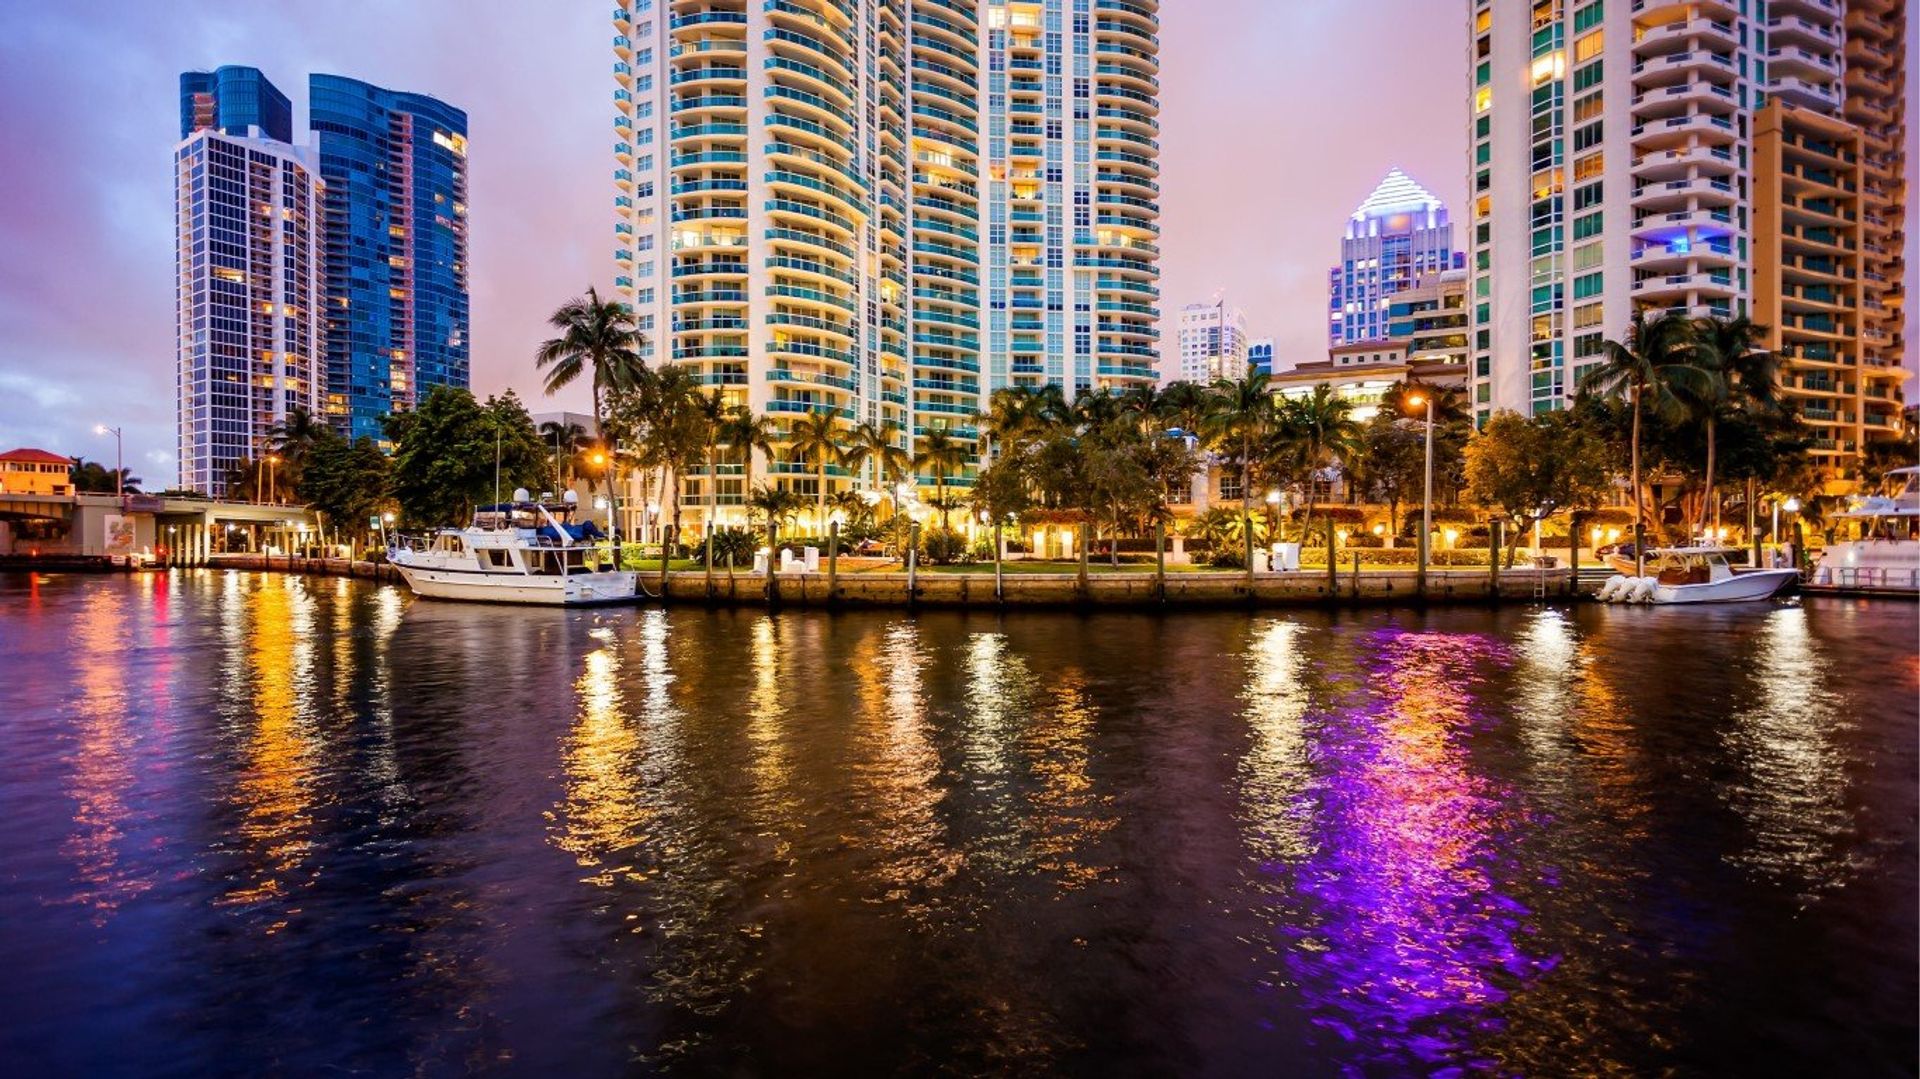 Fort Lauderdale is described as the 'Venice of America', due to its many waterways